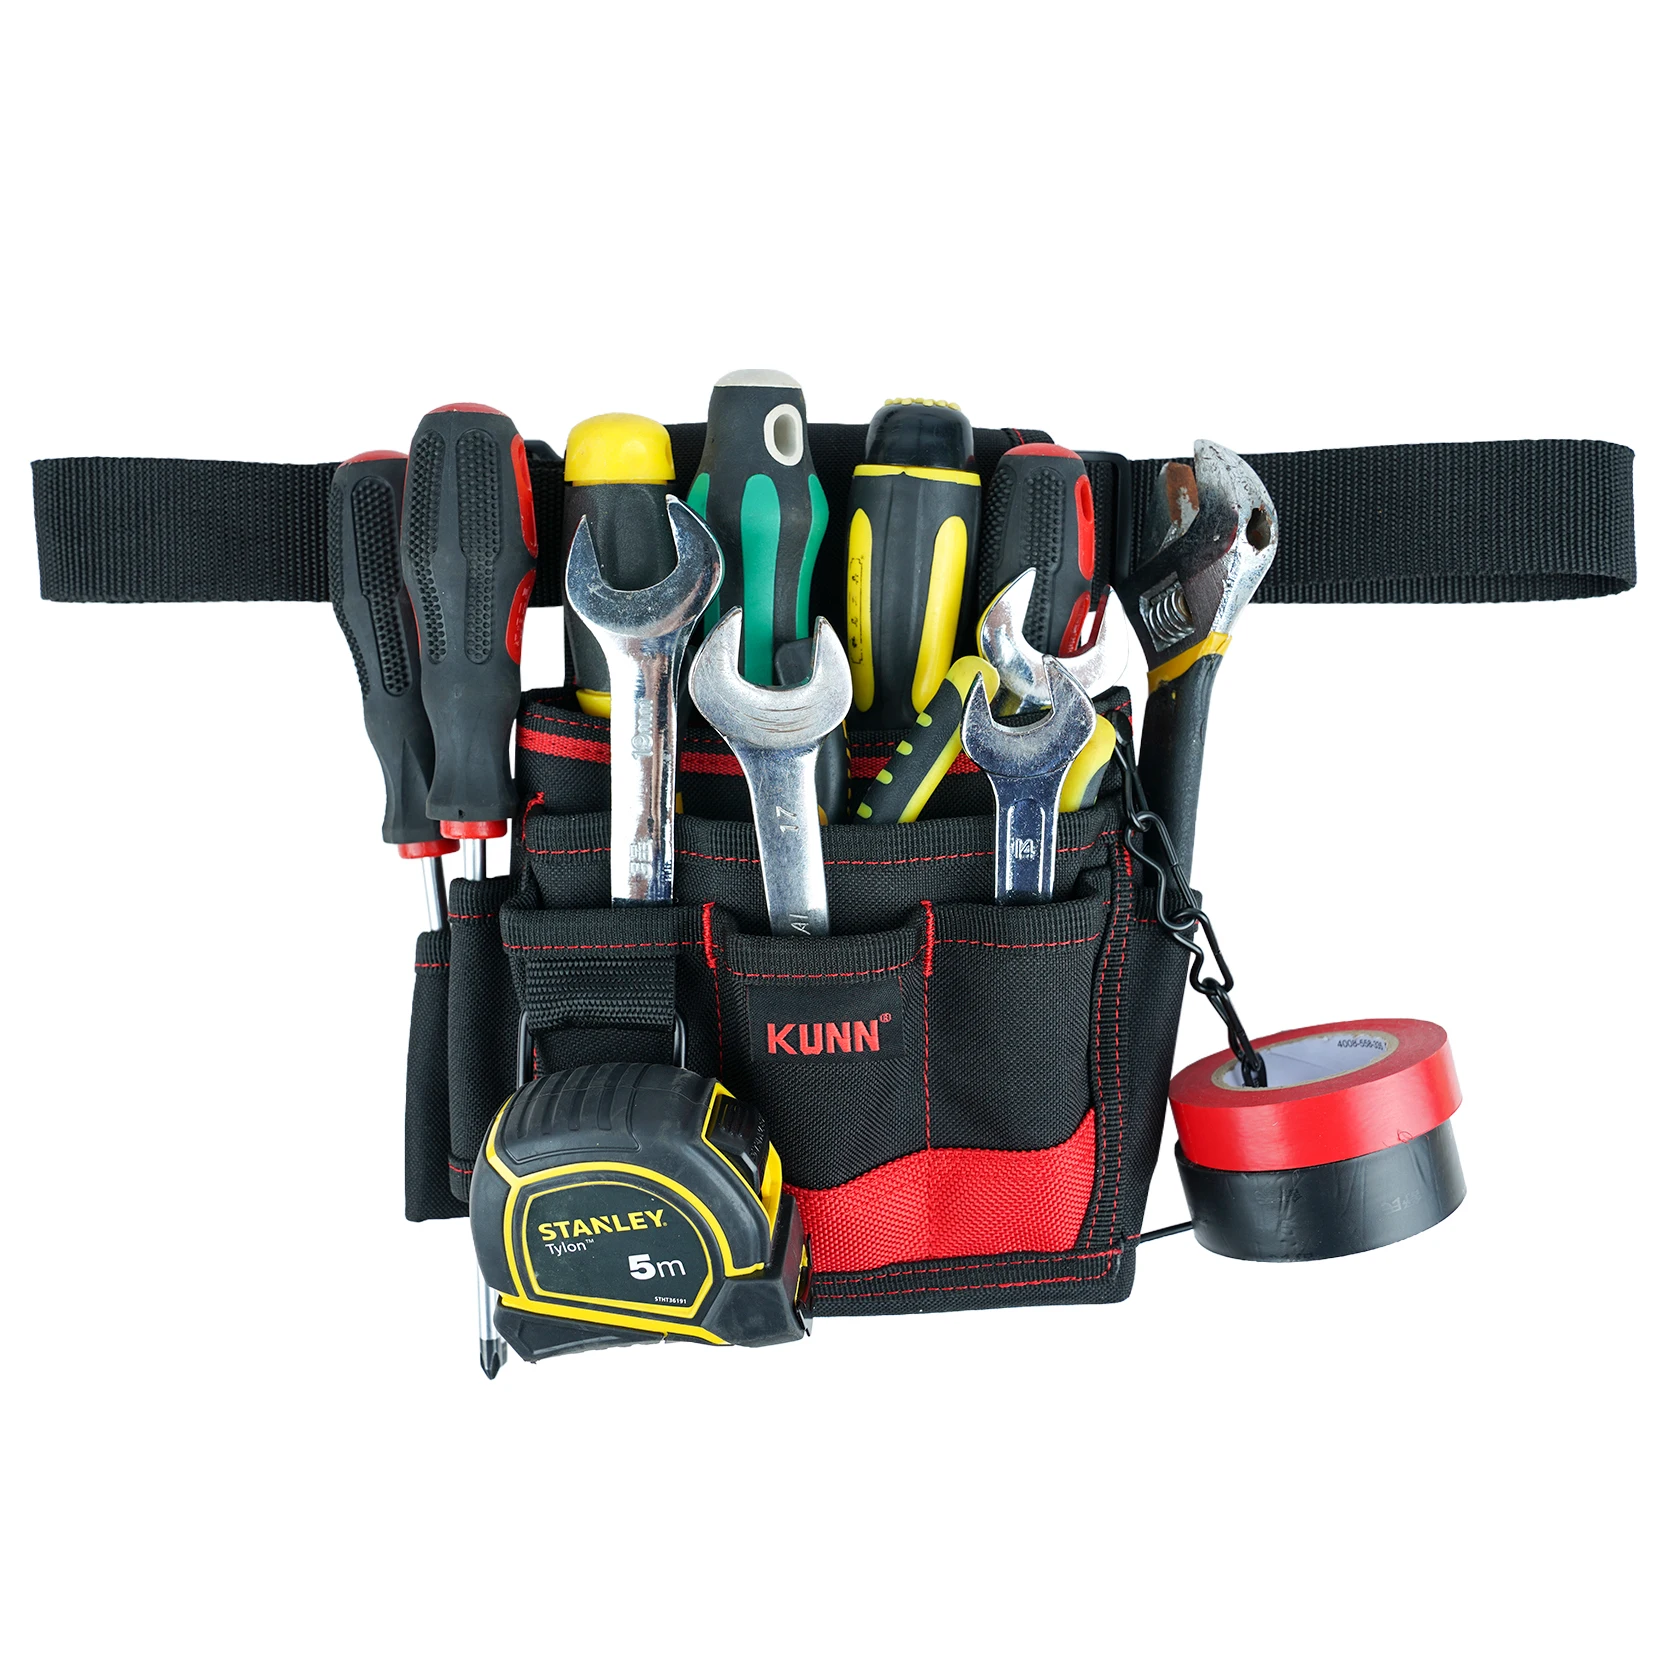 KUNN Electrician Tool Pouch with Waist Belt - Durable Multifunctional Small Pouch Bag for Tool Organization and Storage